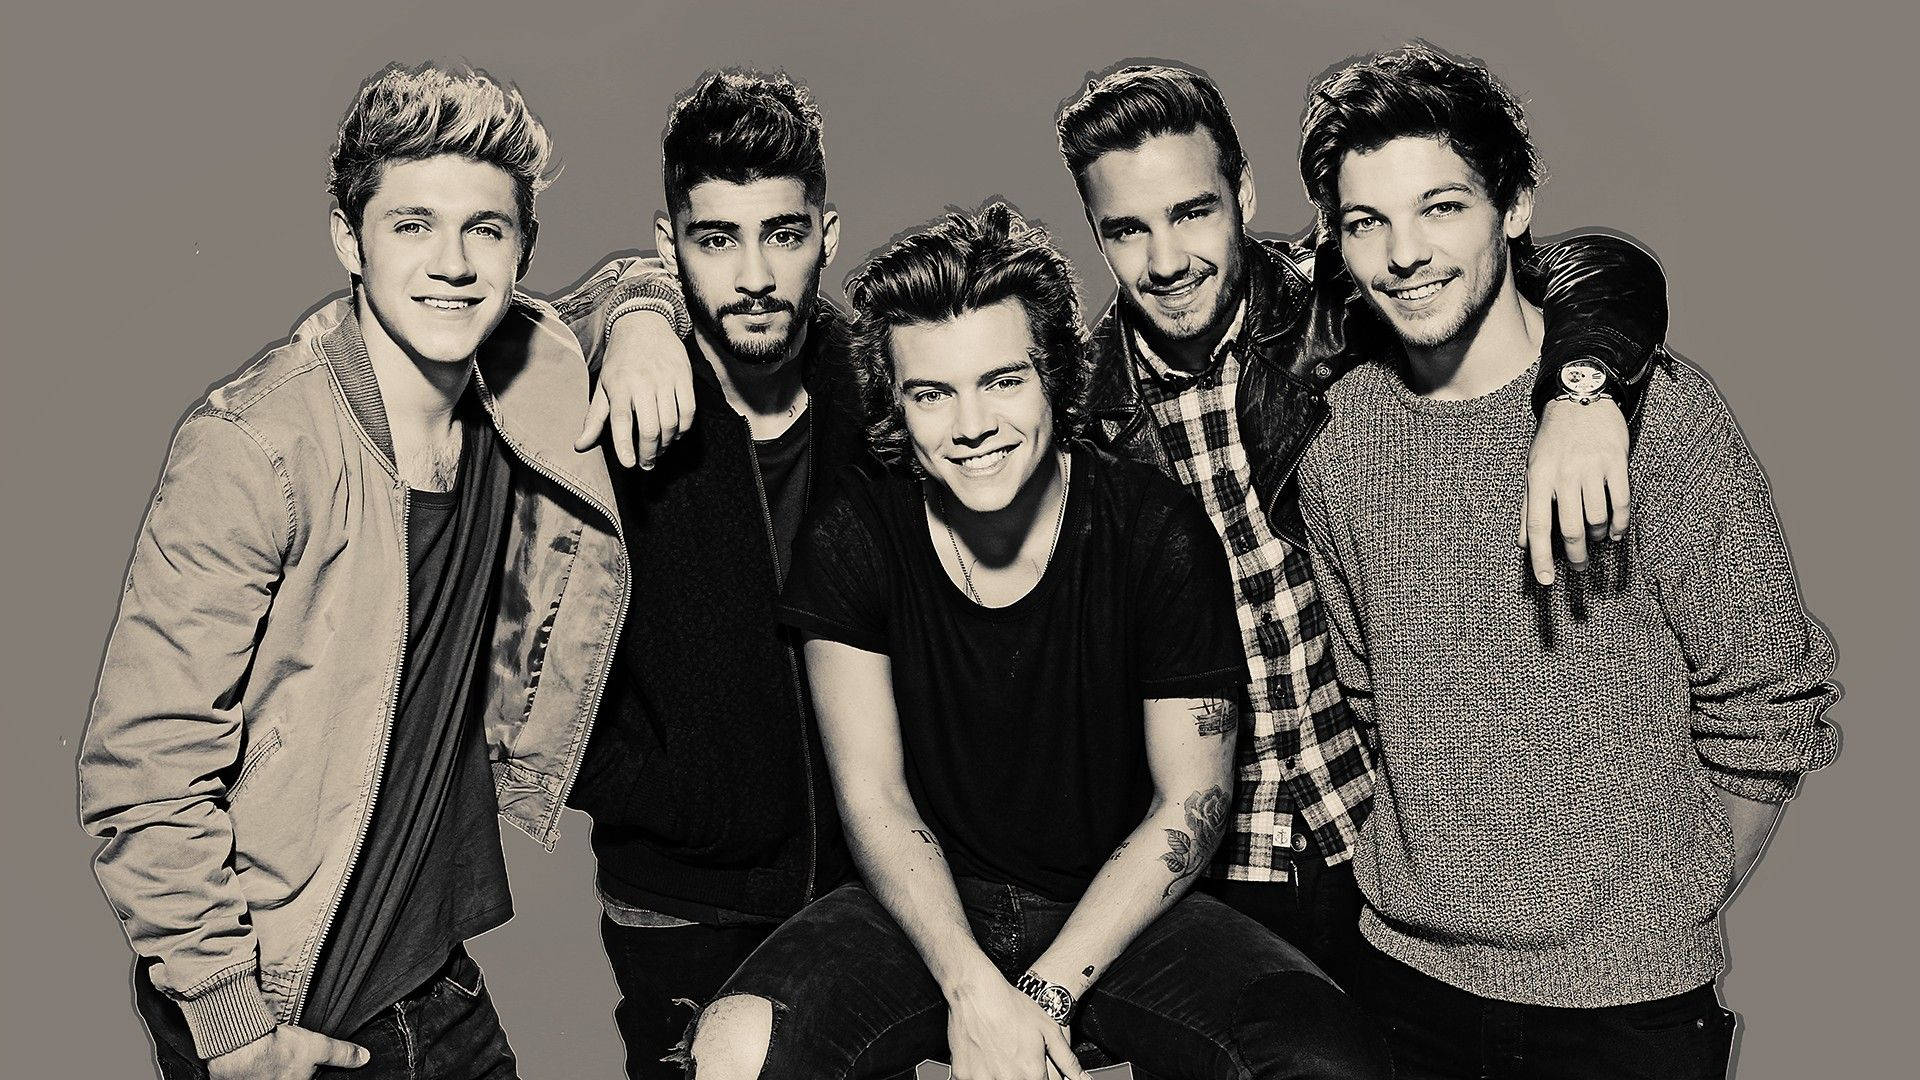 Image 5 Members Of One Direction Pose For The Band's Iconic Greyscale Photo Background